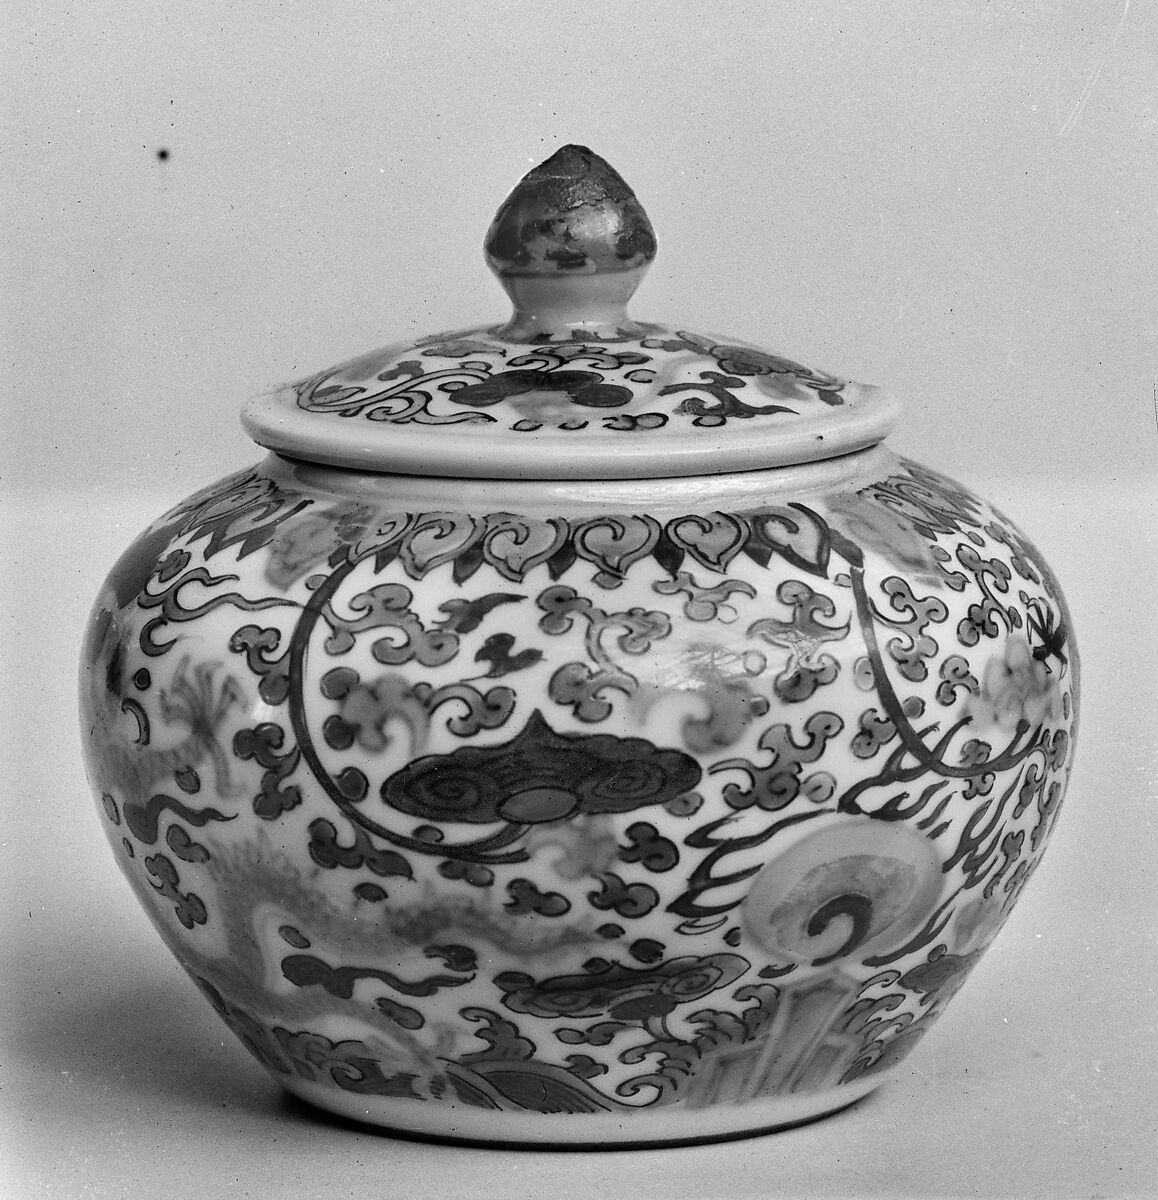 Covered jar with dragons, Porcelain painted in underglaze cobalt blue and overglaze polychrome enamels (Jingdezhen ware), China 